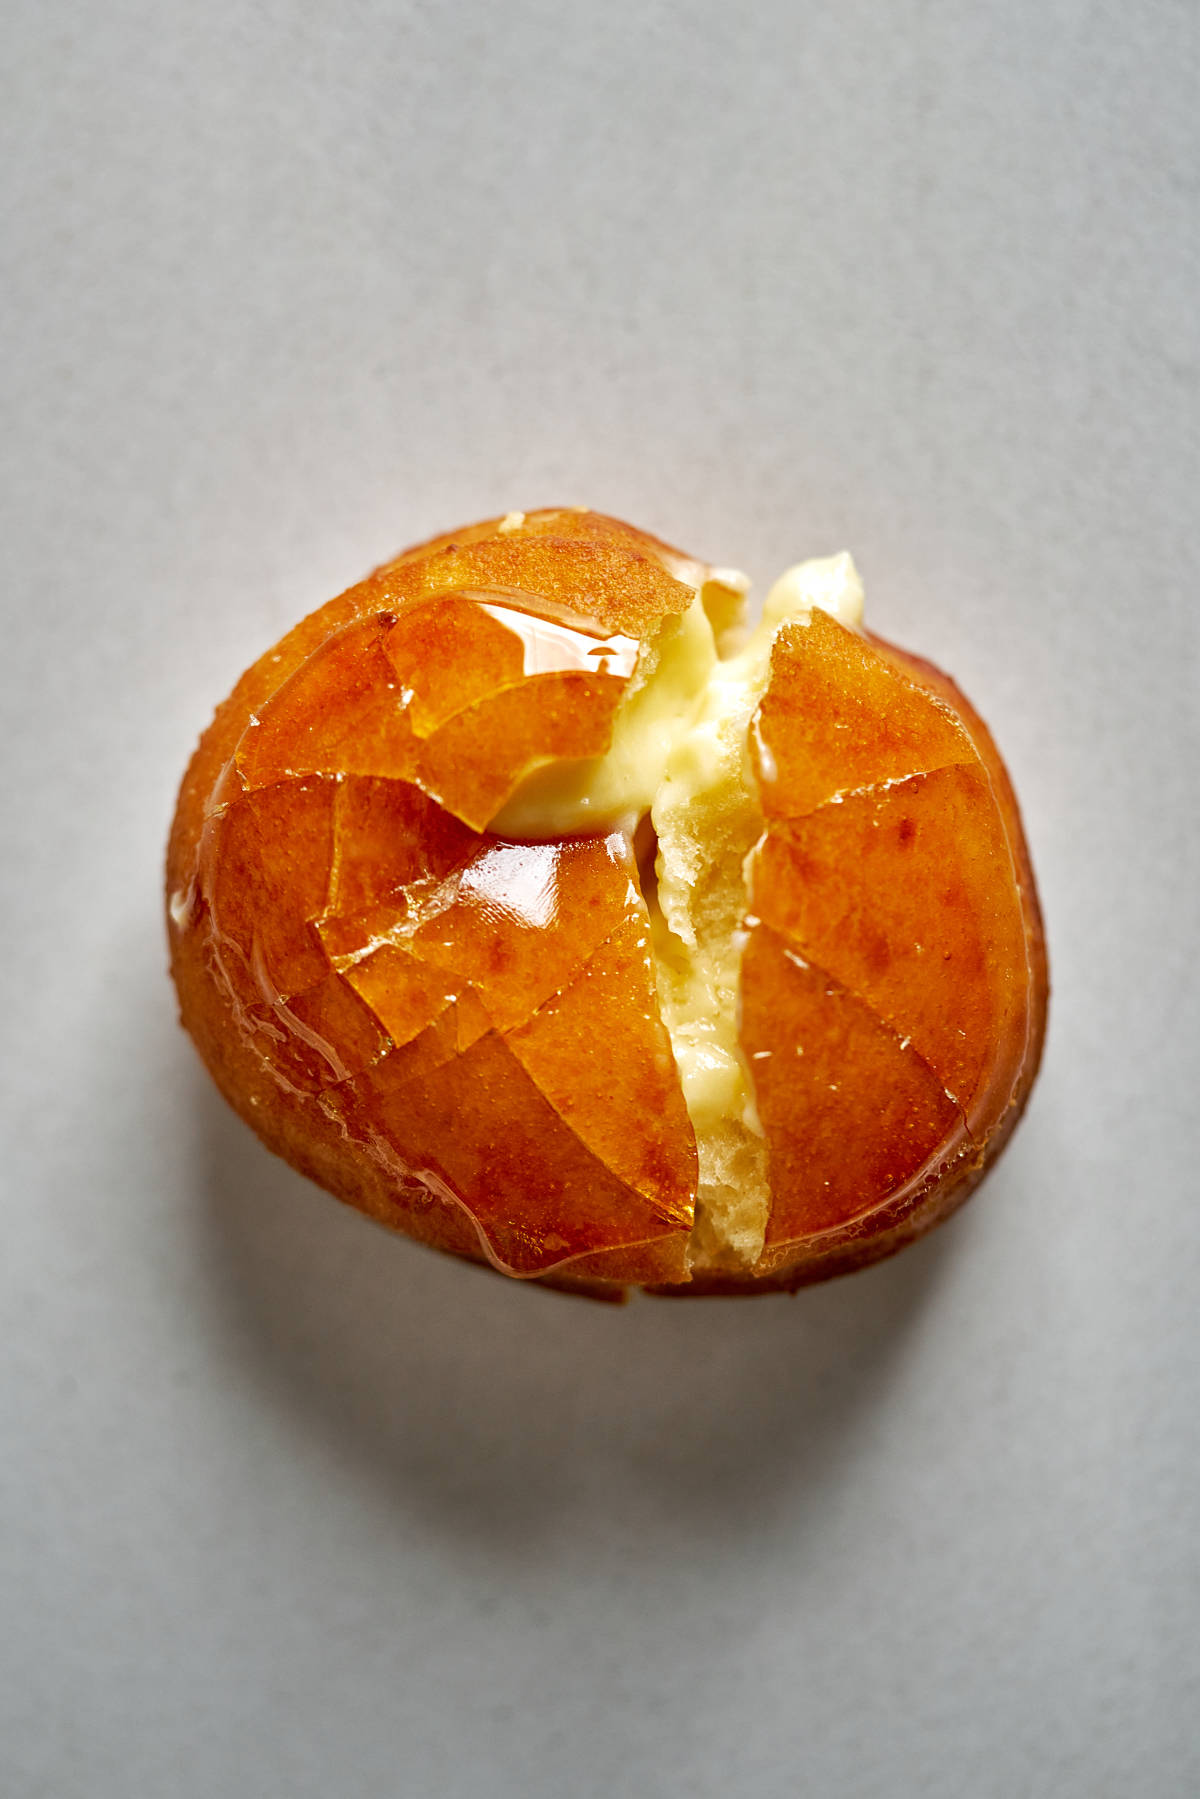 Filled donut with cracked caramel topping.